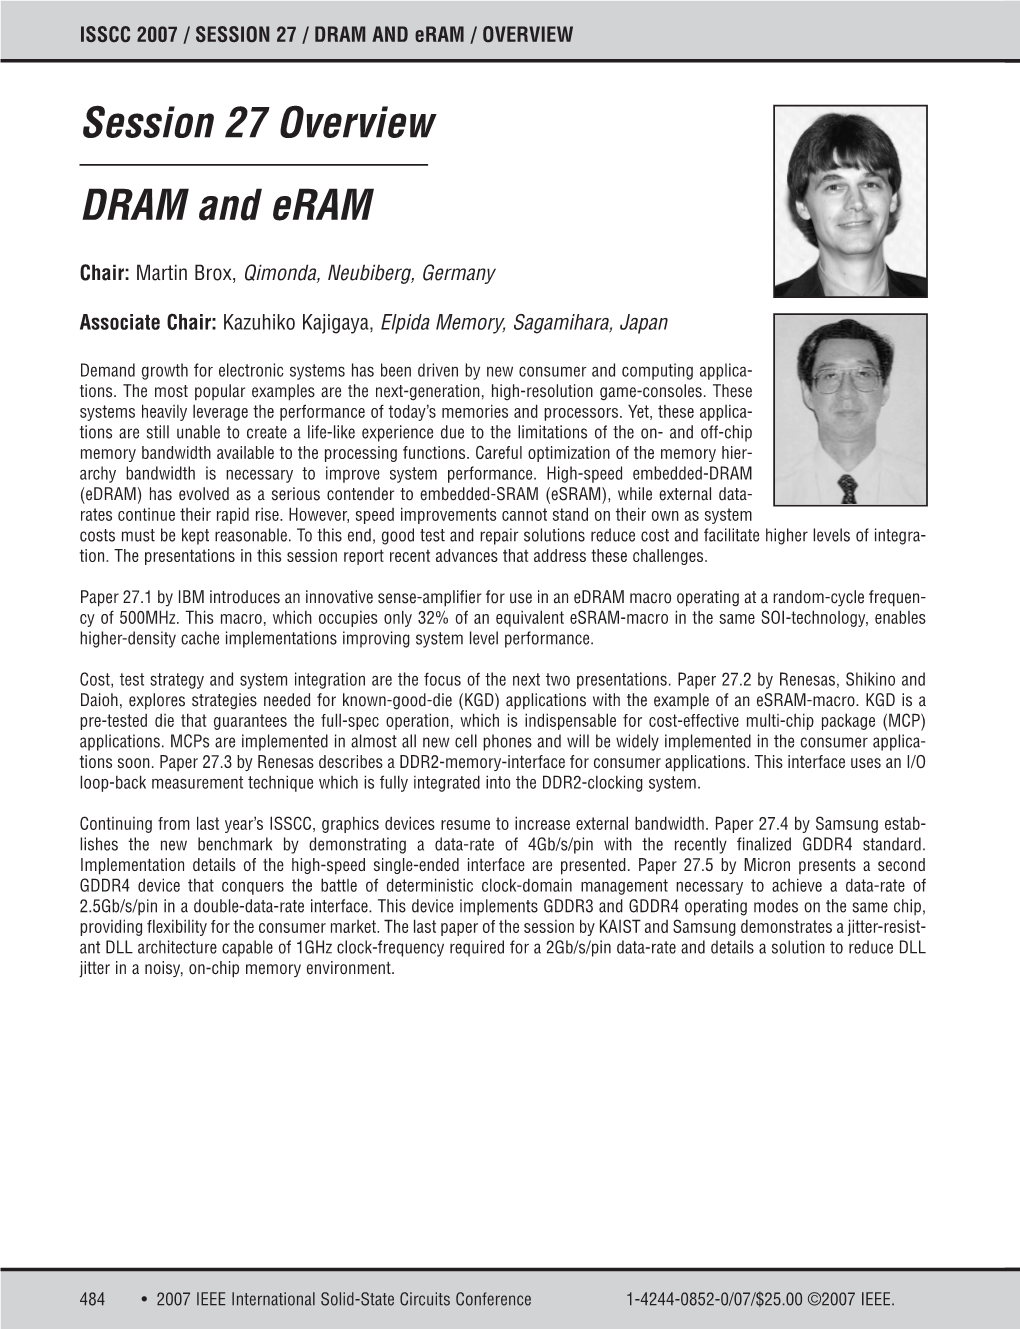 Session 27 Overview DRAM and Eram